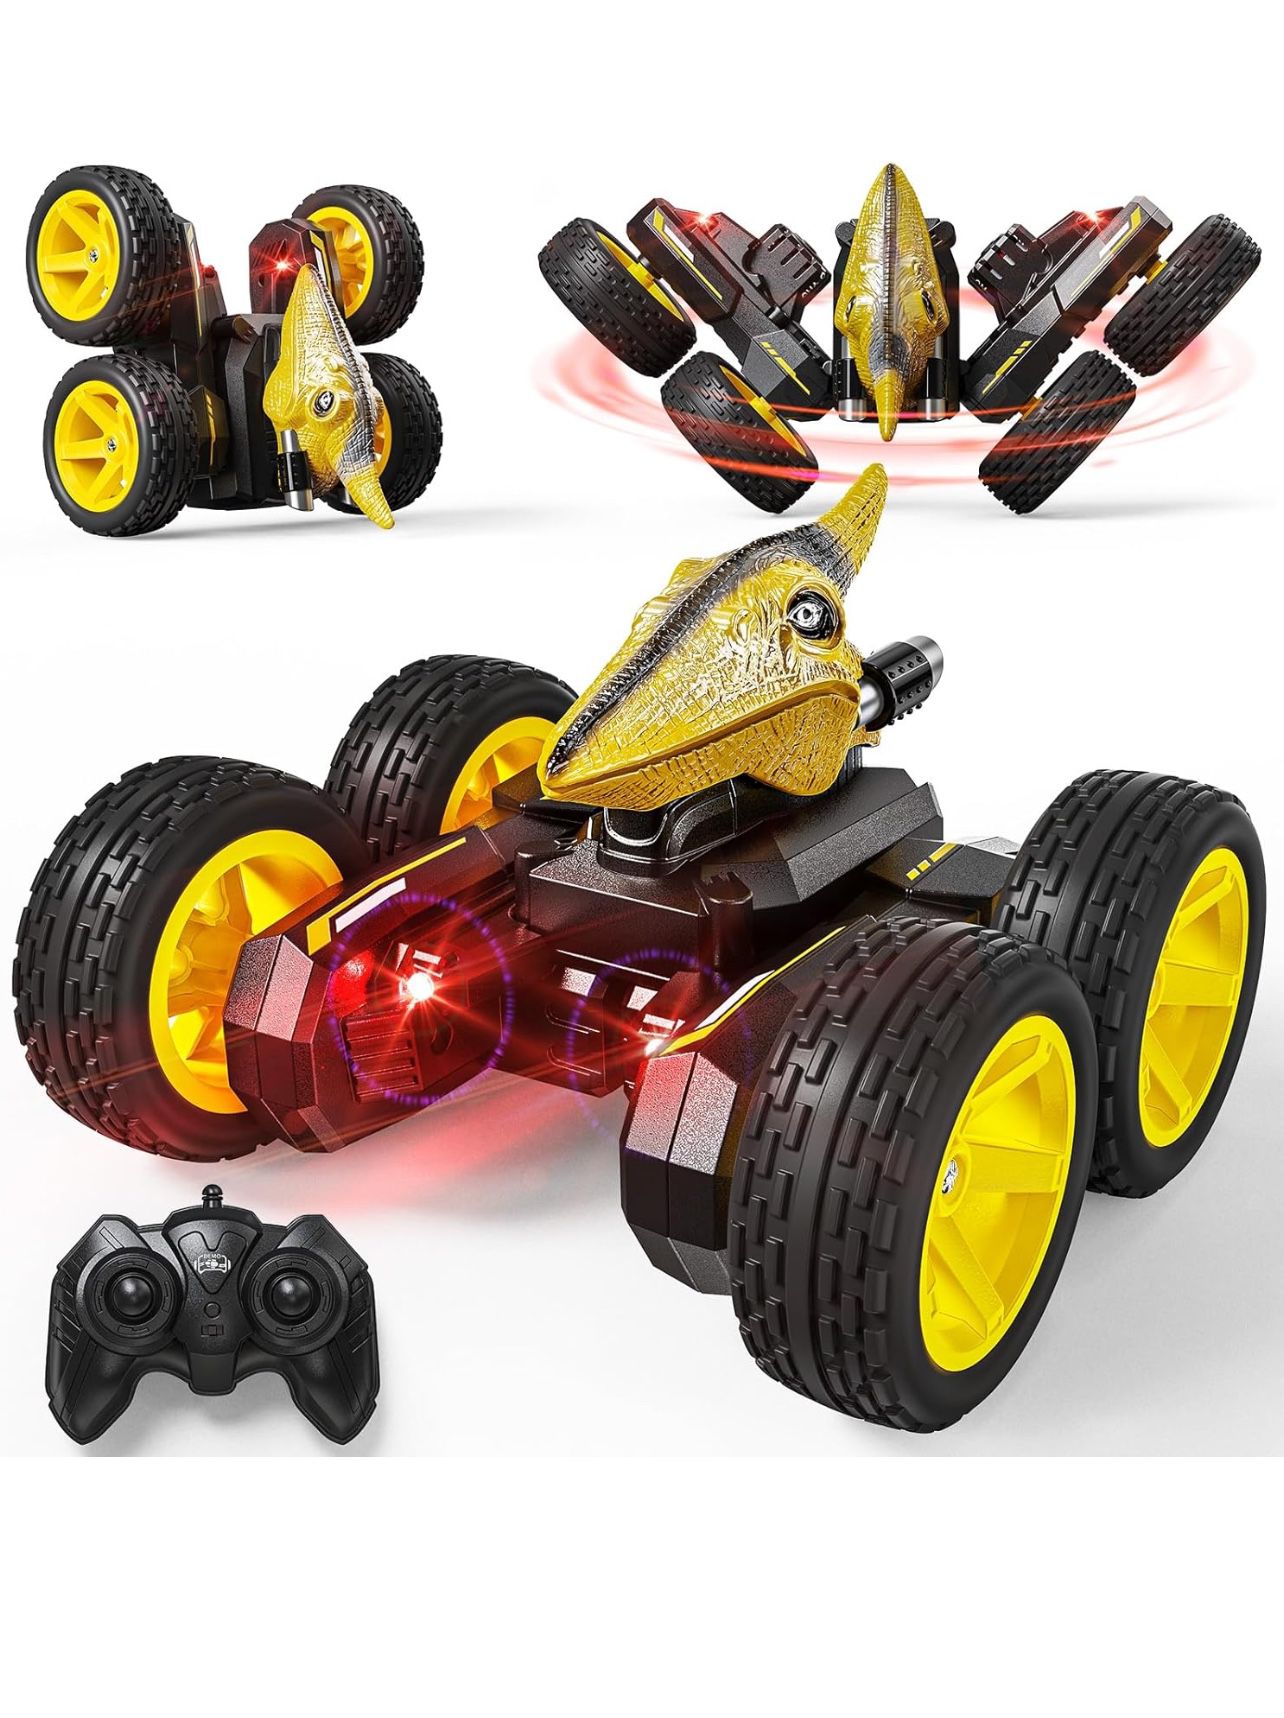 Brandnew Mini Remote Control Car,Dinosaur RC Car Truck Toys for Toddlers 1:28 Scale with Light,4WD,2.4Ghz Rechargeable,All Terrains for Boys Kids Girl